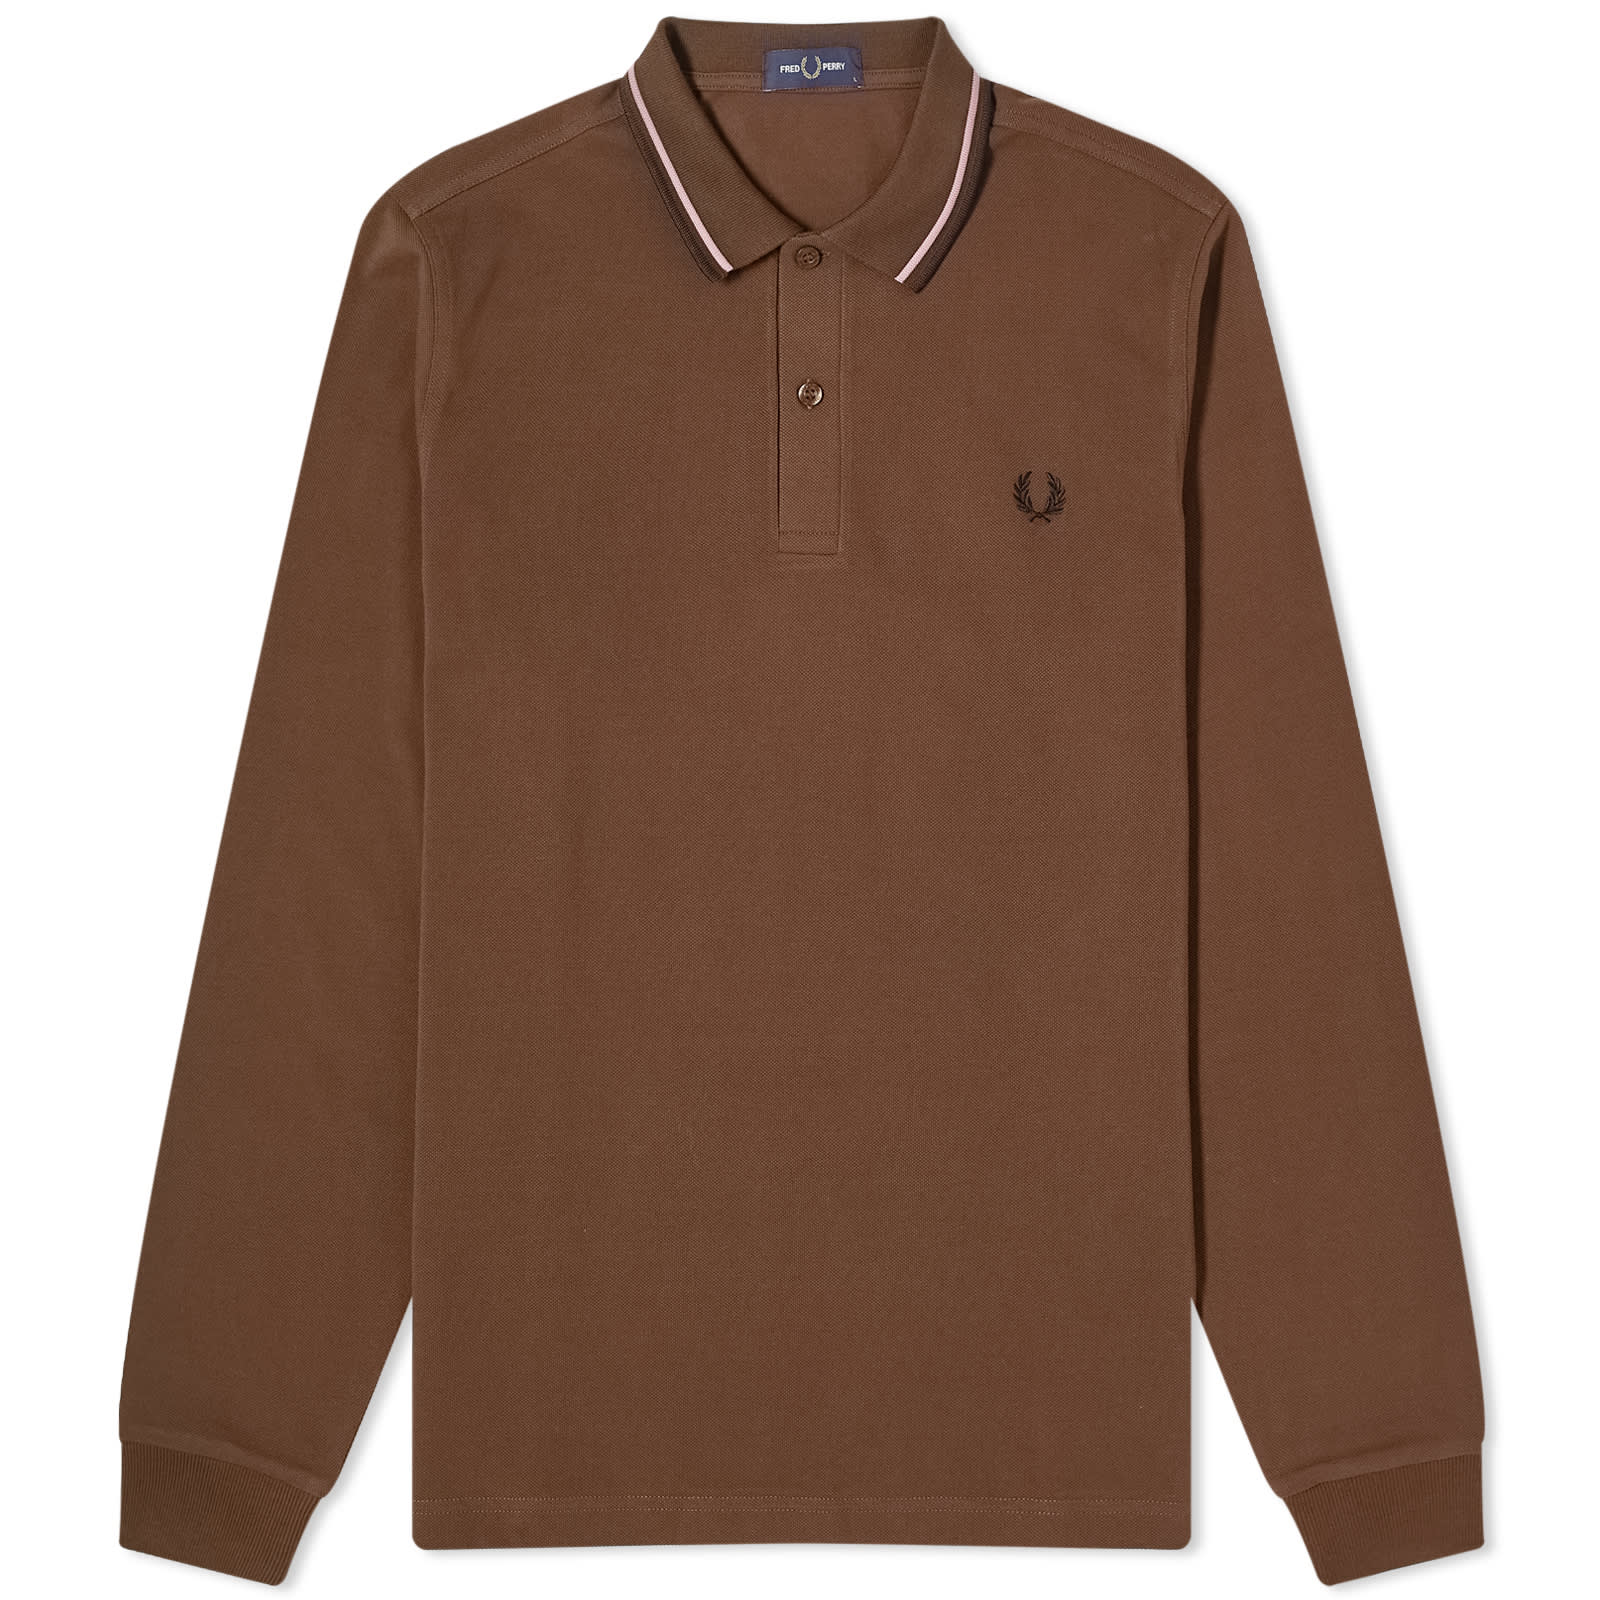 Поло Fred Perry Long Sleeve Twin Tipped, цвет Burnt Tobacco рубашка fred perry long sleeve twin tipped shirt цвет burnt tobacco